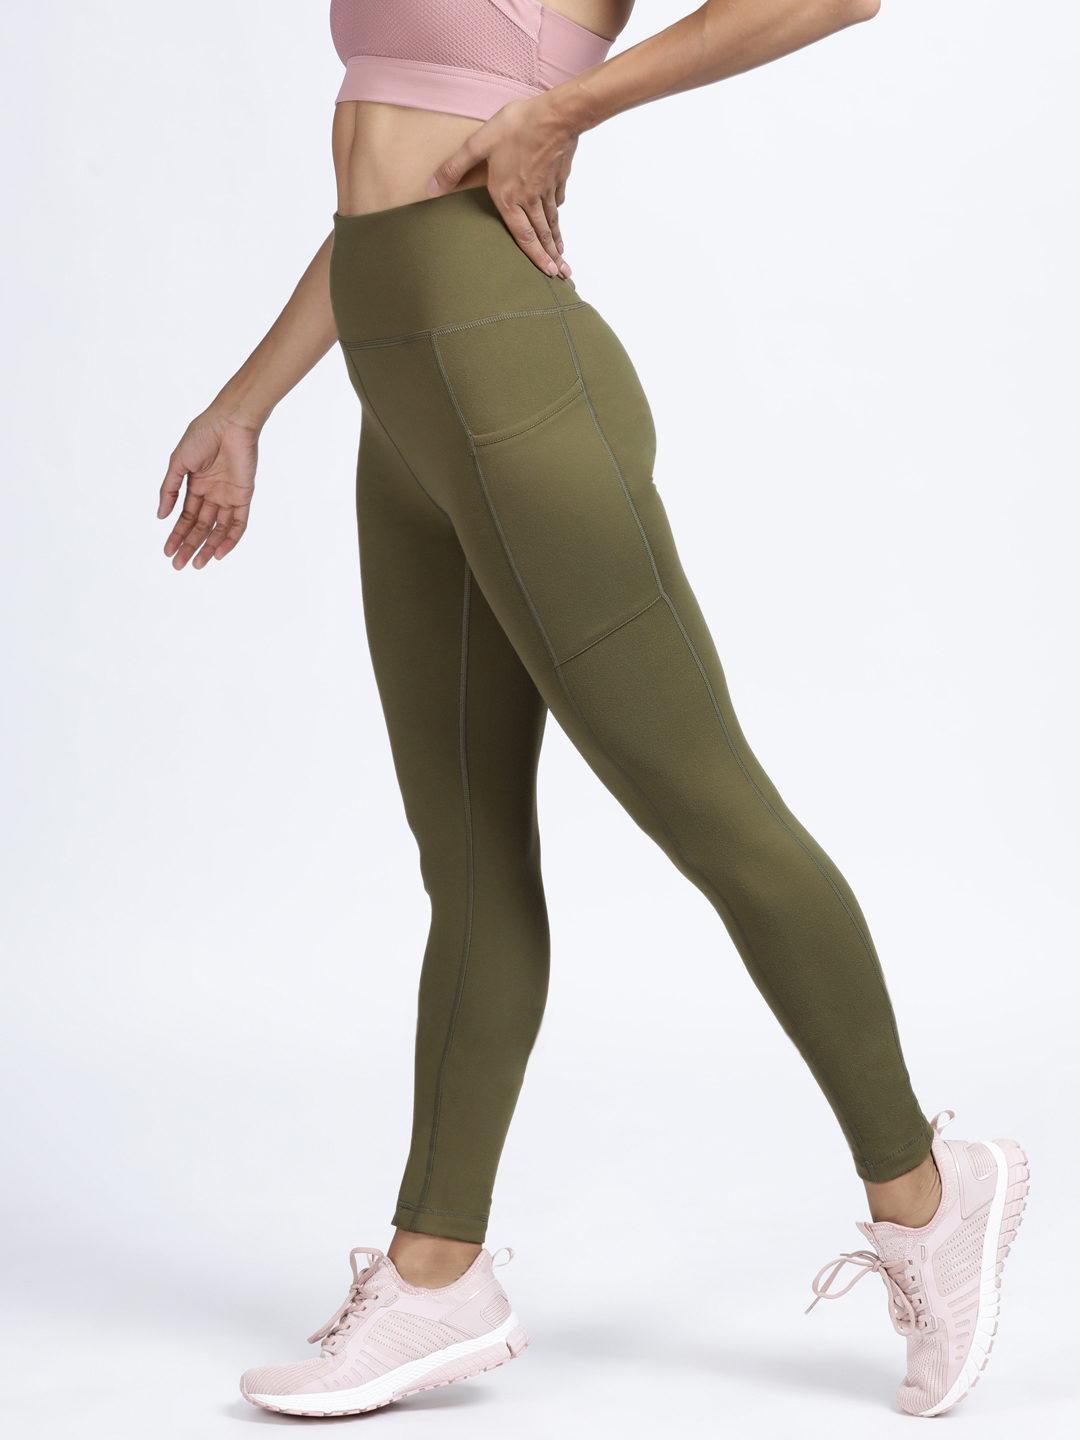 Olive 7/8 length Leggings with Pockets